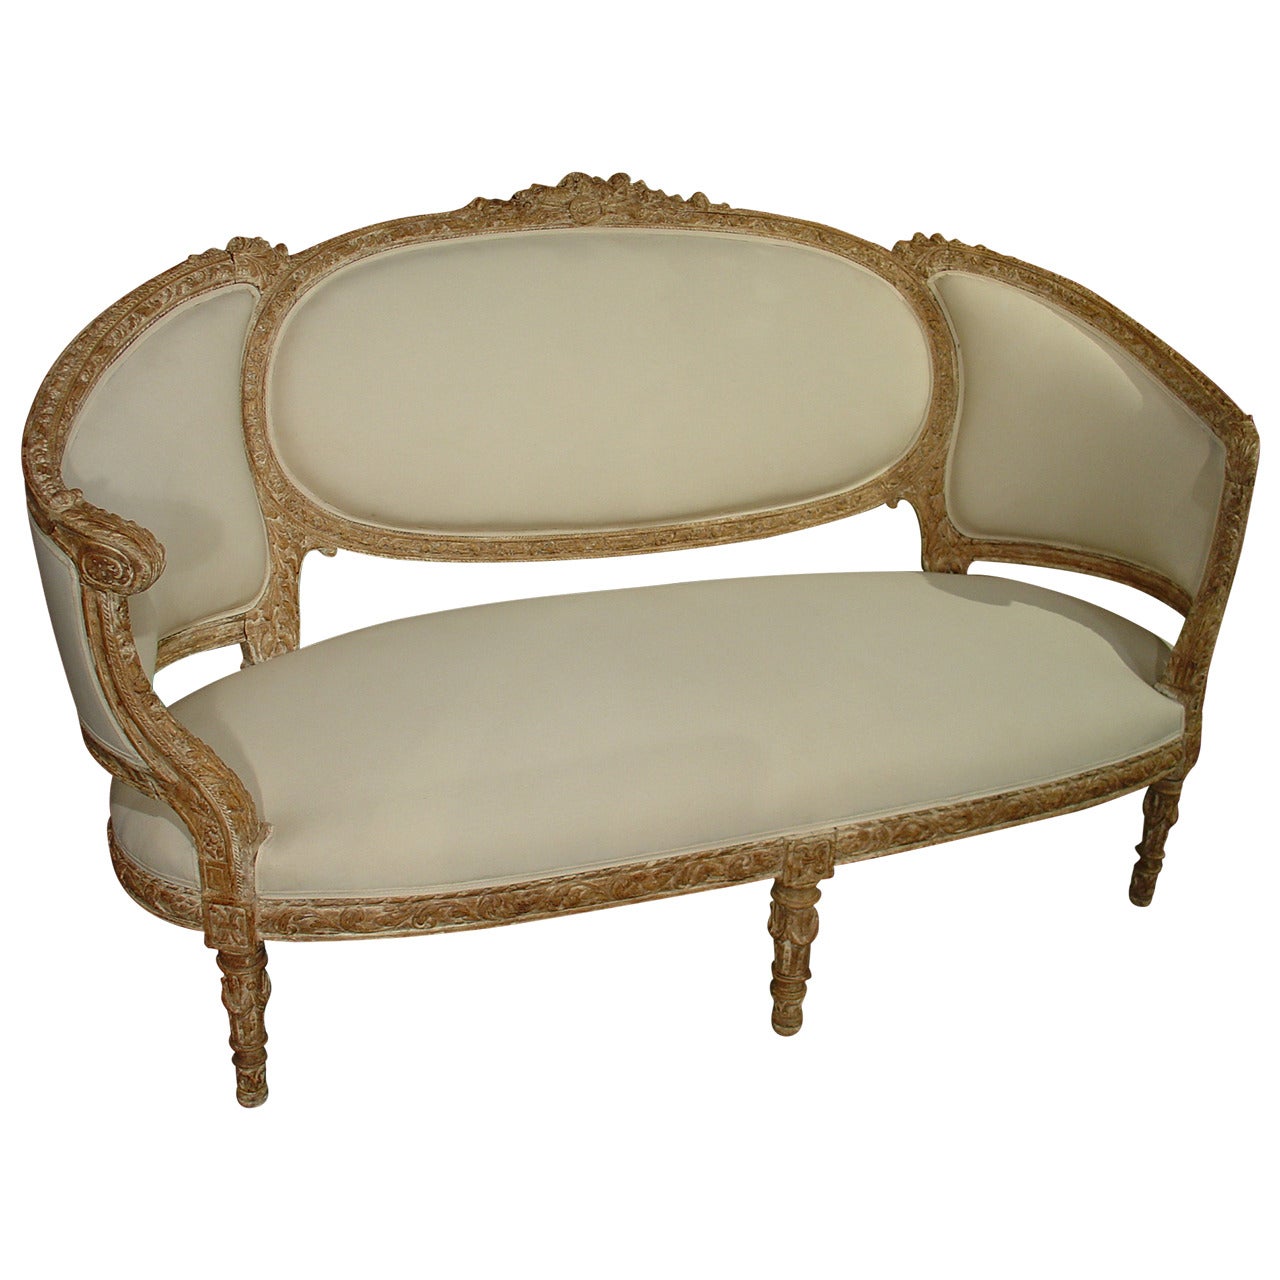 Beautiful Antique French Parcel Paint Settee with Musical Motifs